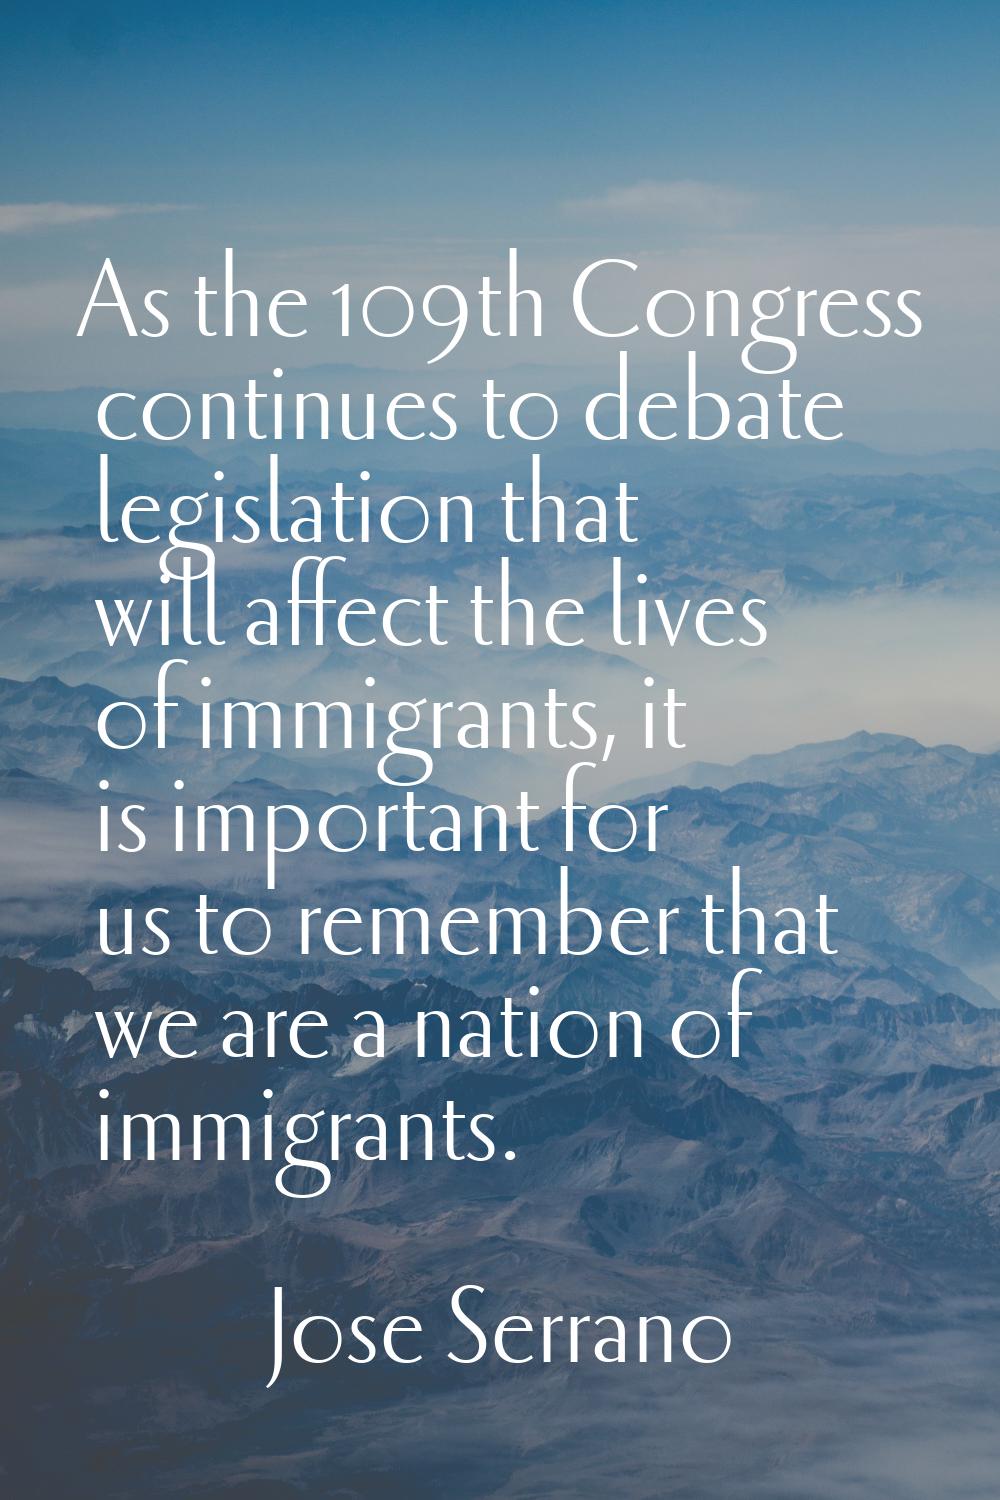 As the 109th Congress continues to debate legislation that will affect the lives of immigrants, it 